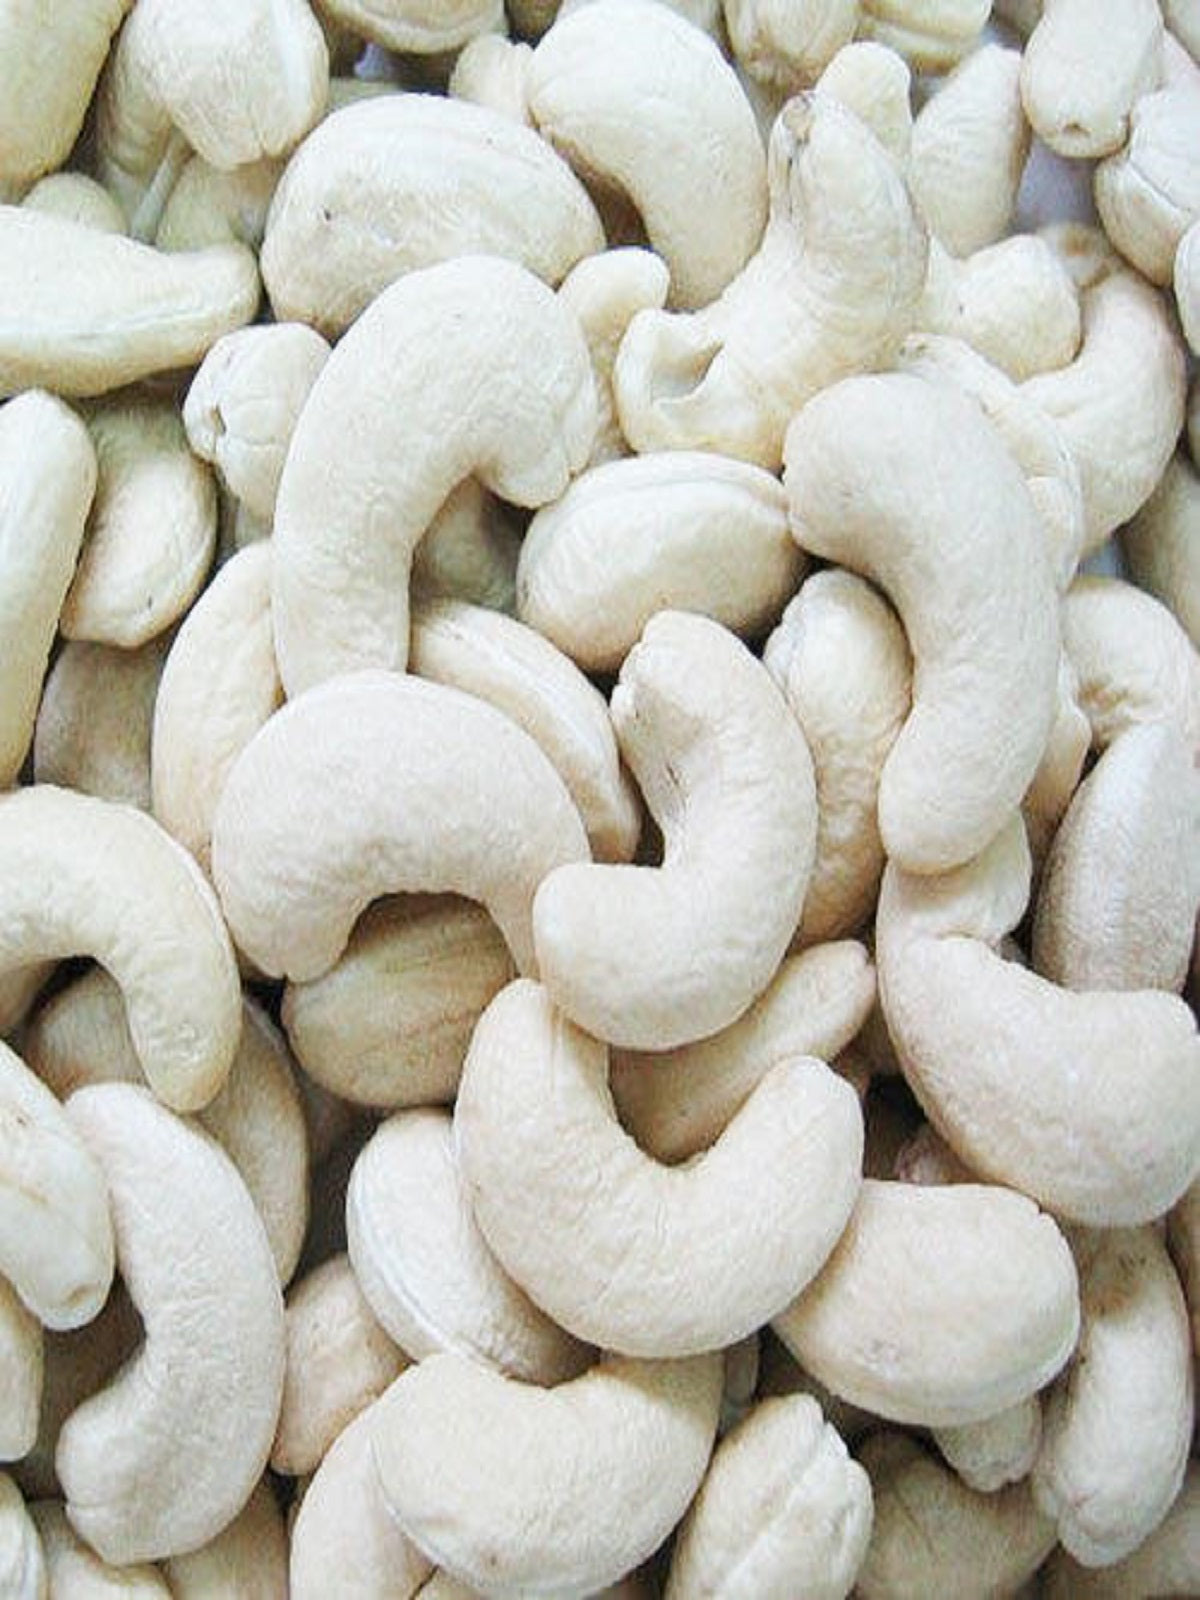 Best Quality Cashew available at Farmonics